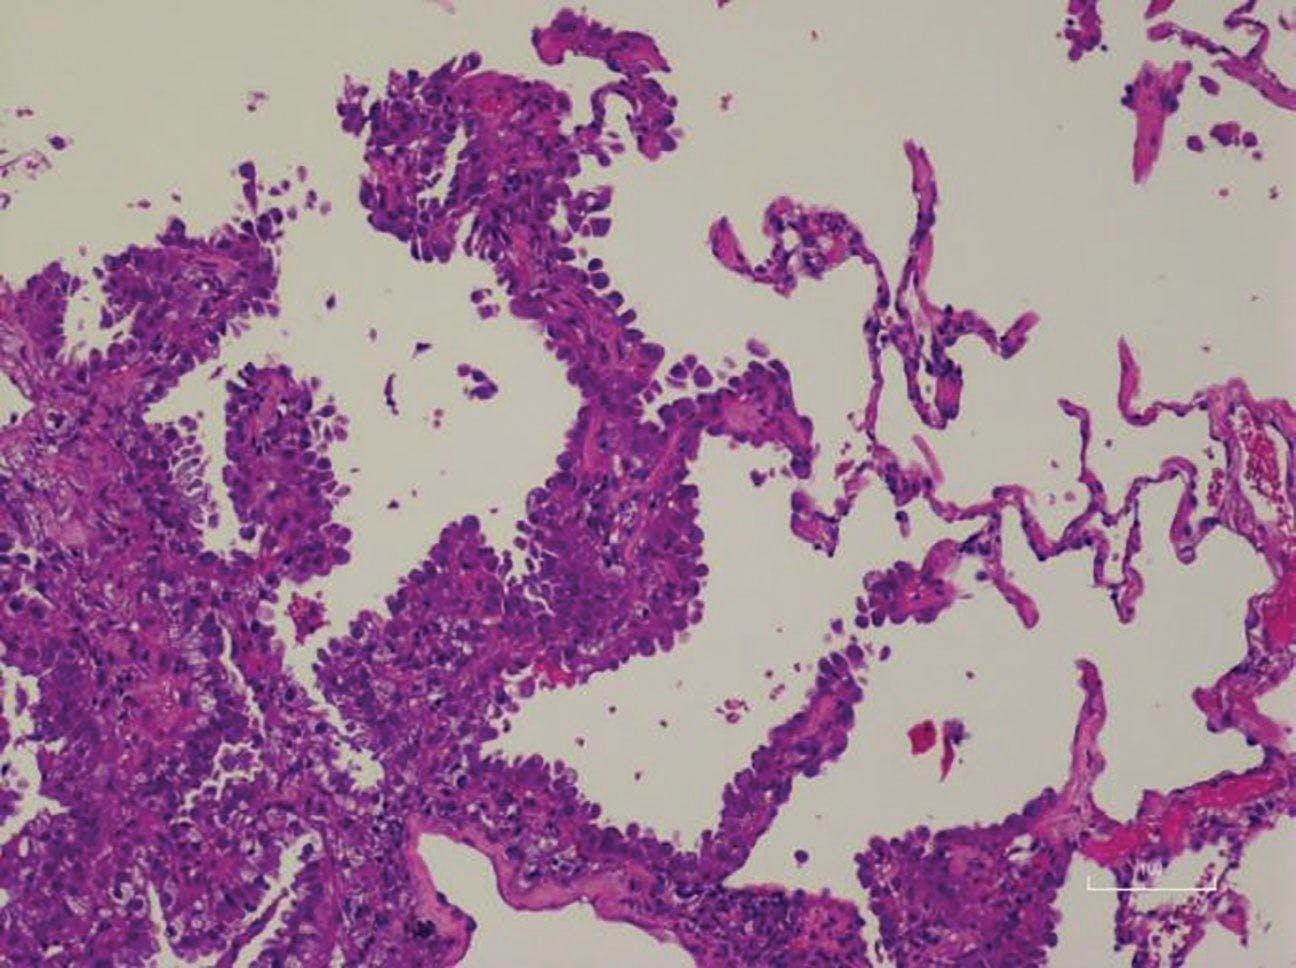 A Patient With Newly Diagnosed, Advanced EGFR-Mutated Non–Small Cell Lung Cancer